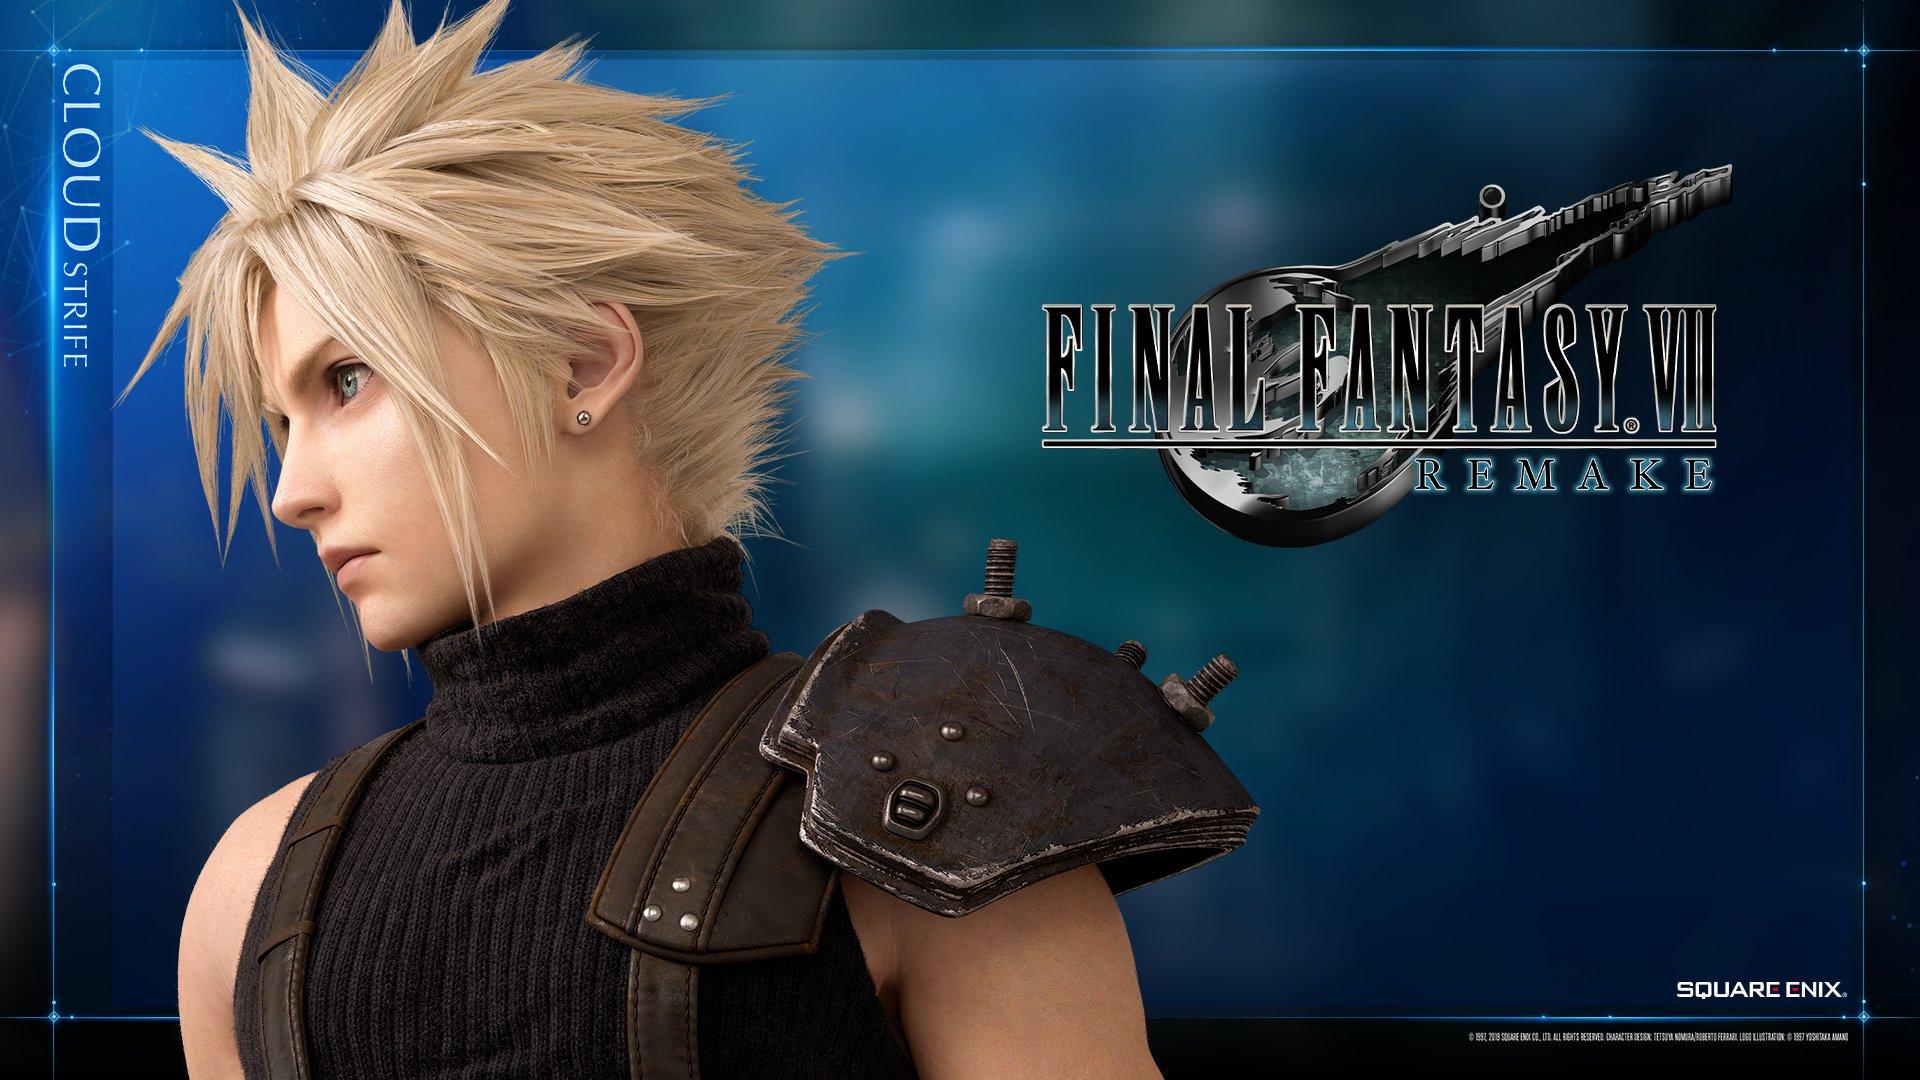 Final Fantasy VII Remake Wallpaper of Cloud Strife and Barret Wallace Now Available